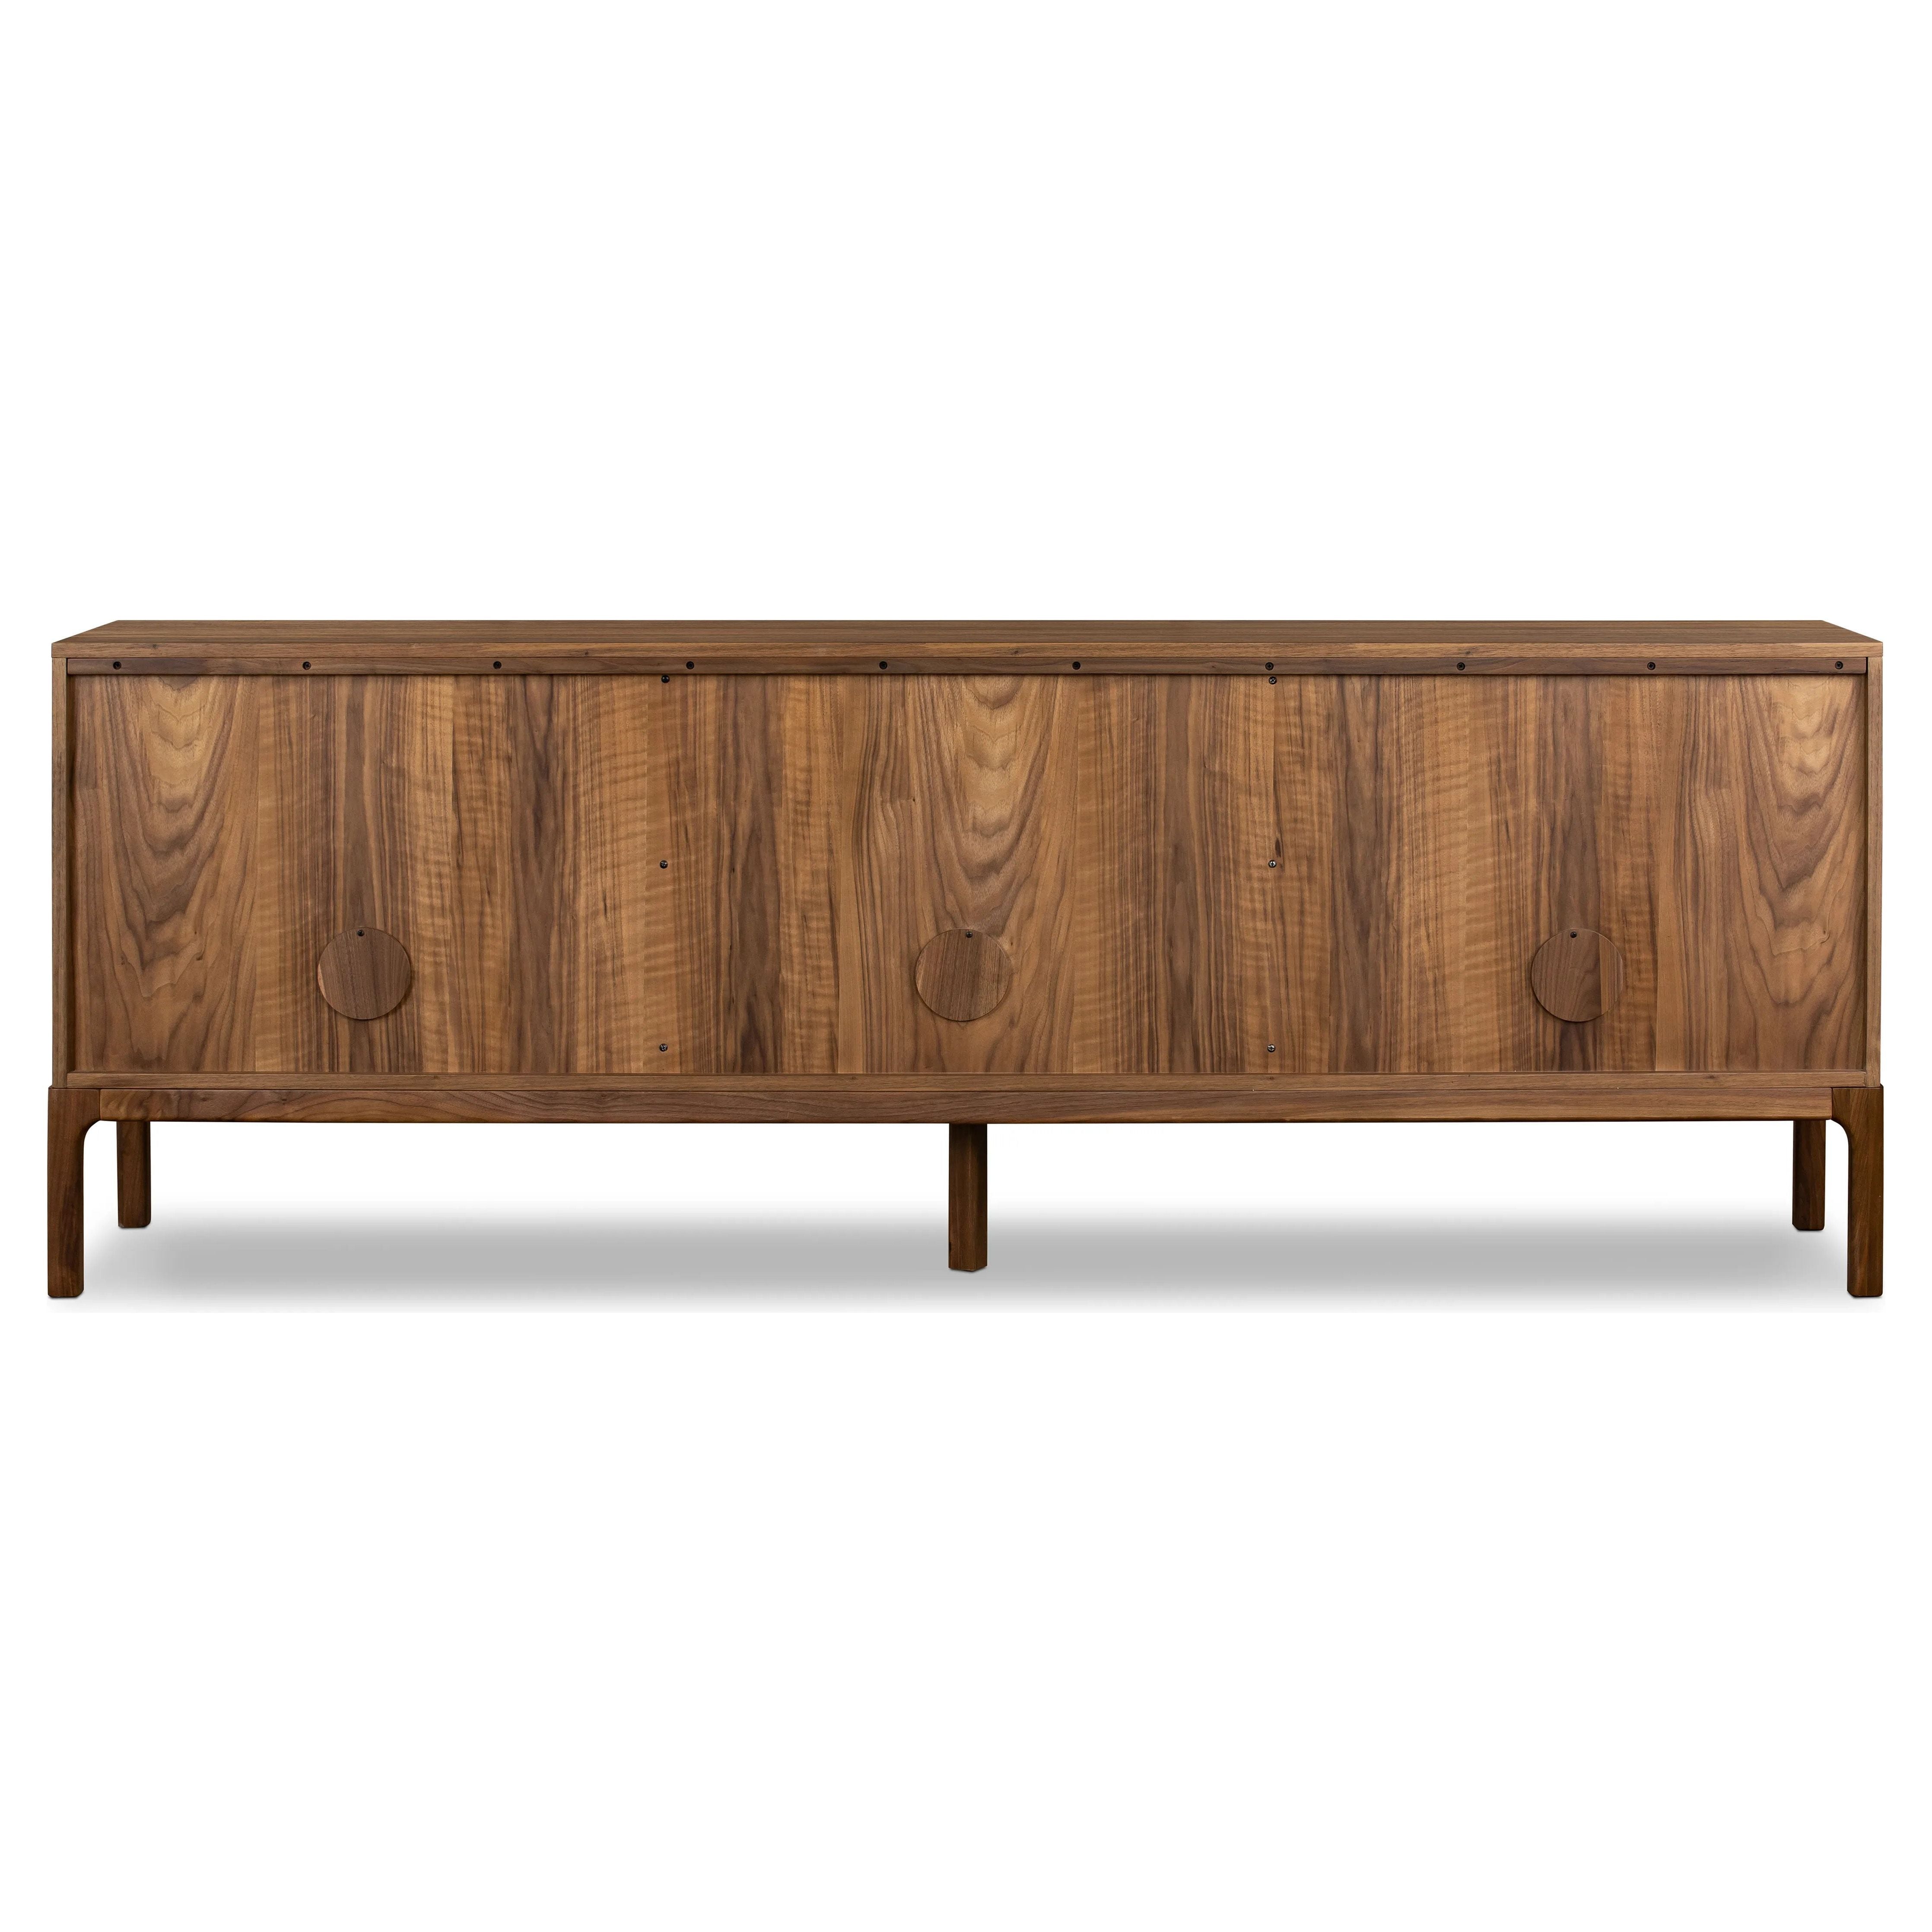 Inspired by campaign-style furniture of the 1800s â€” packable pieces first designed for traveling military use â€” a simply shaped sideboard of natural walnut features a subtly inset top and rounded legs, finished with wooden hardware Amethyst Home provides interior design, new home construction design consulting, vintage area rugs, and lighting in the Boston metro area.